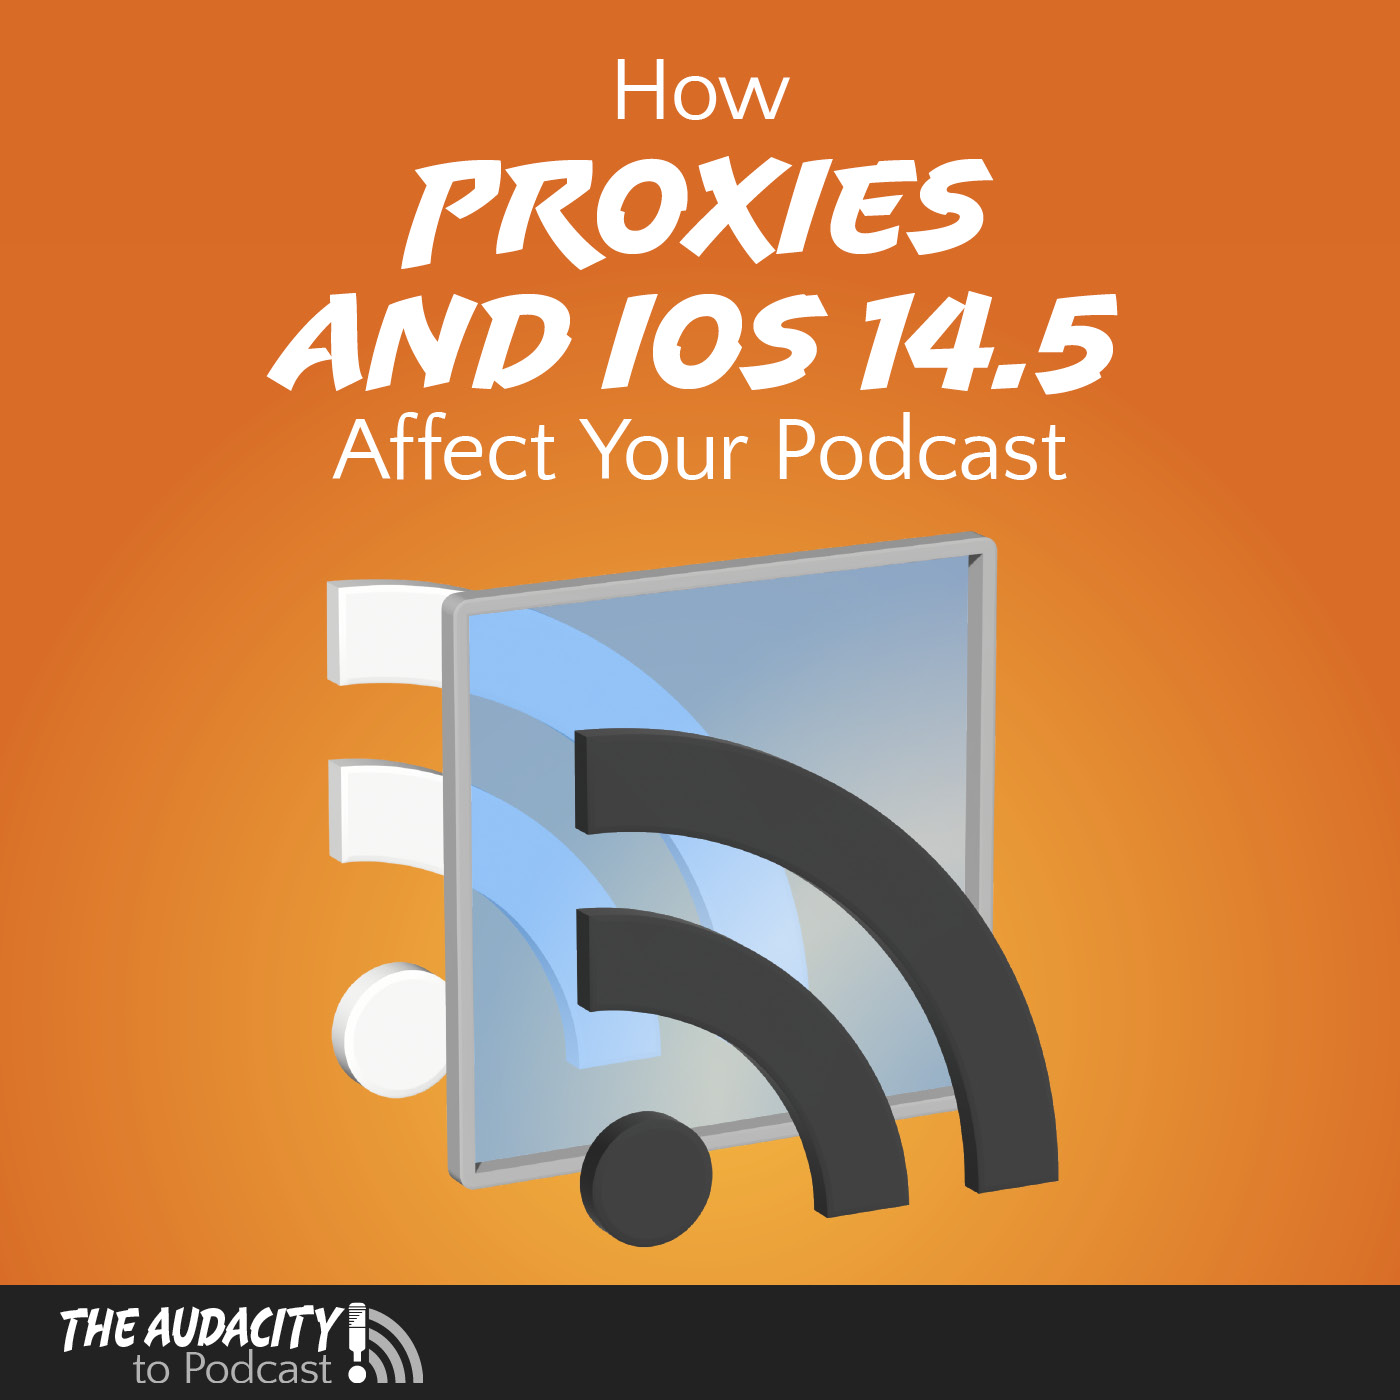 How Proxies and iOS 14.5 Affect Your Podcast